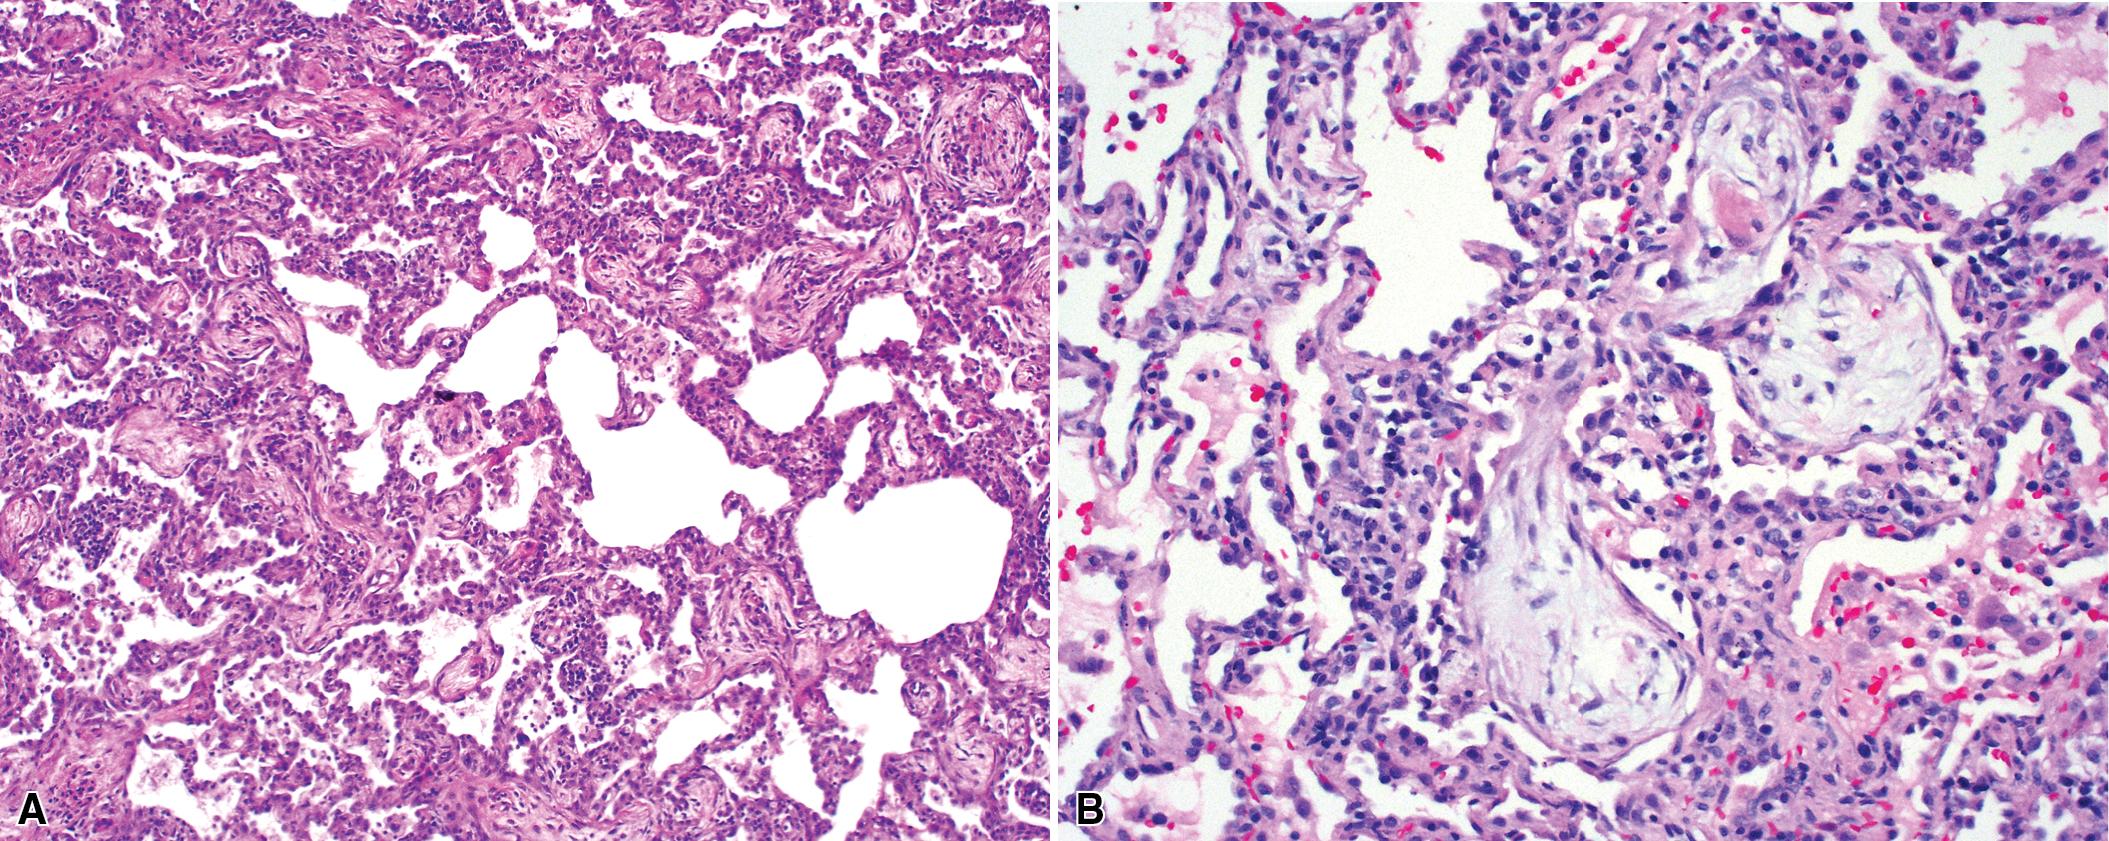 Figure 8.20, Organizing pneumonia pattern. In cryptogenic organizing pneumonia (COP), the lung architecture is typically preserved. Lymphocytes, plasma cells, and histiocytes are present to variable degree within the interstitium. (A) Note the very patchy organization. (B) The prototypical appearance of COP, with patchy organization and mild interstitial pneumonia.